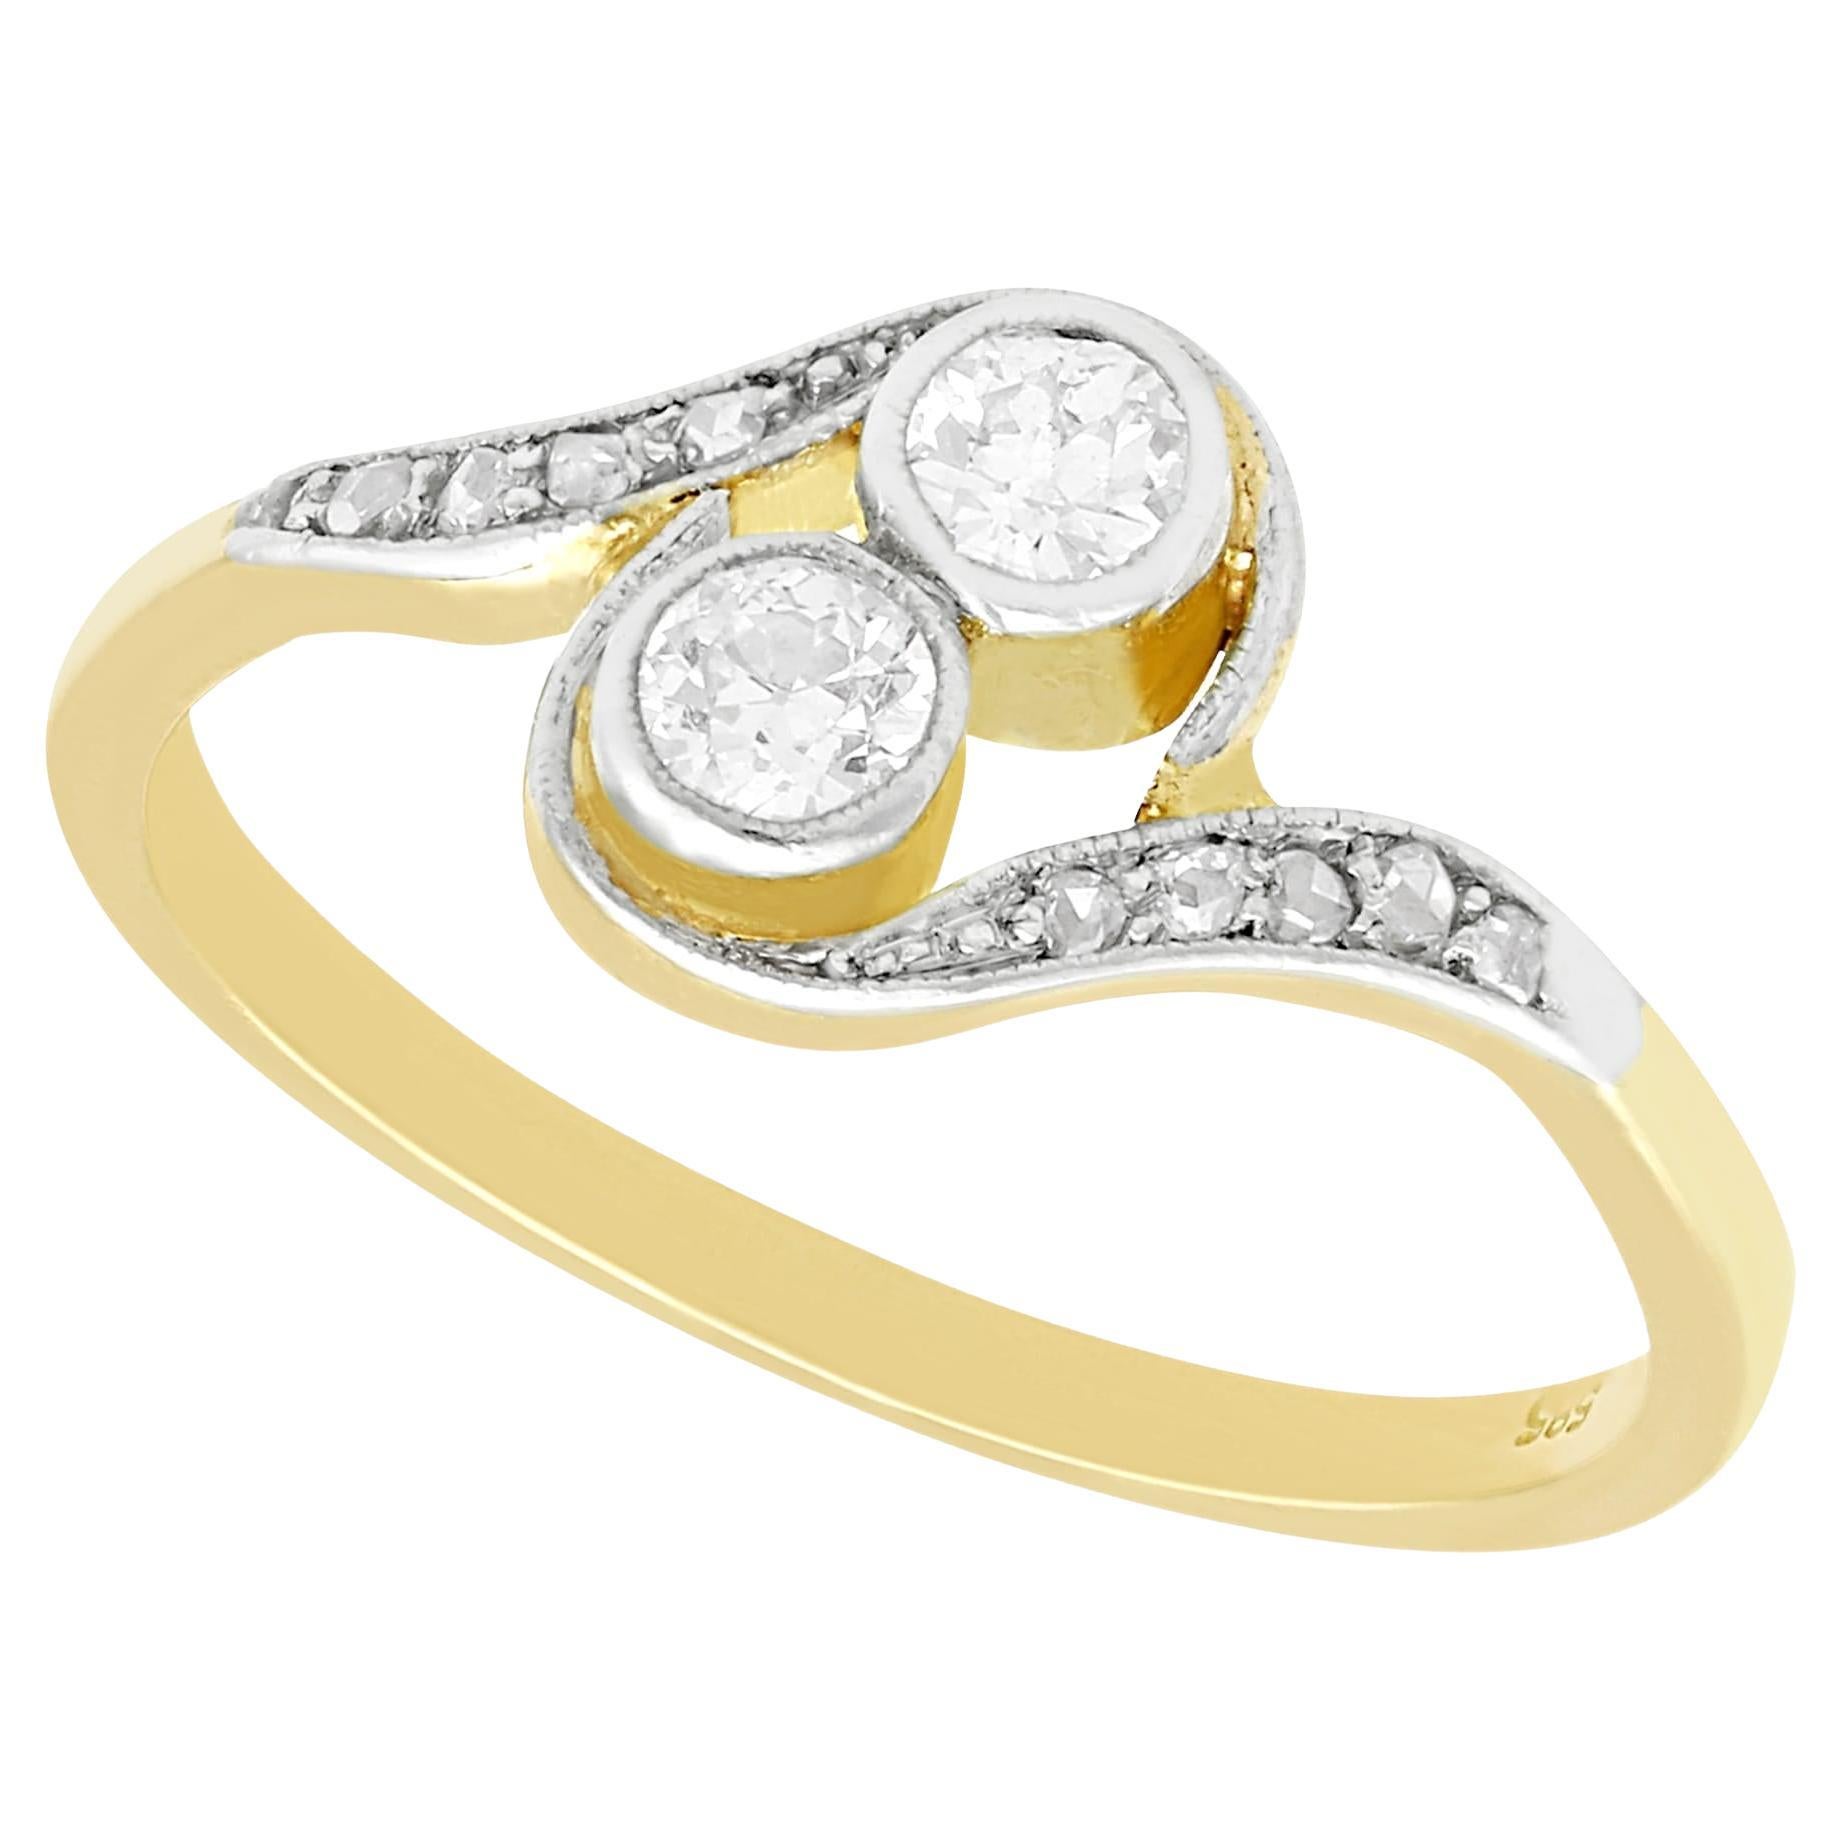 1920s Antique Diamond and Yellow Gold Twist Engagement Ring